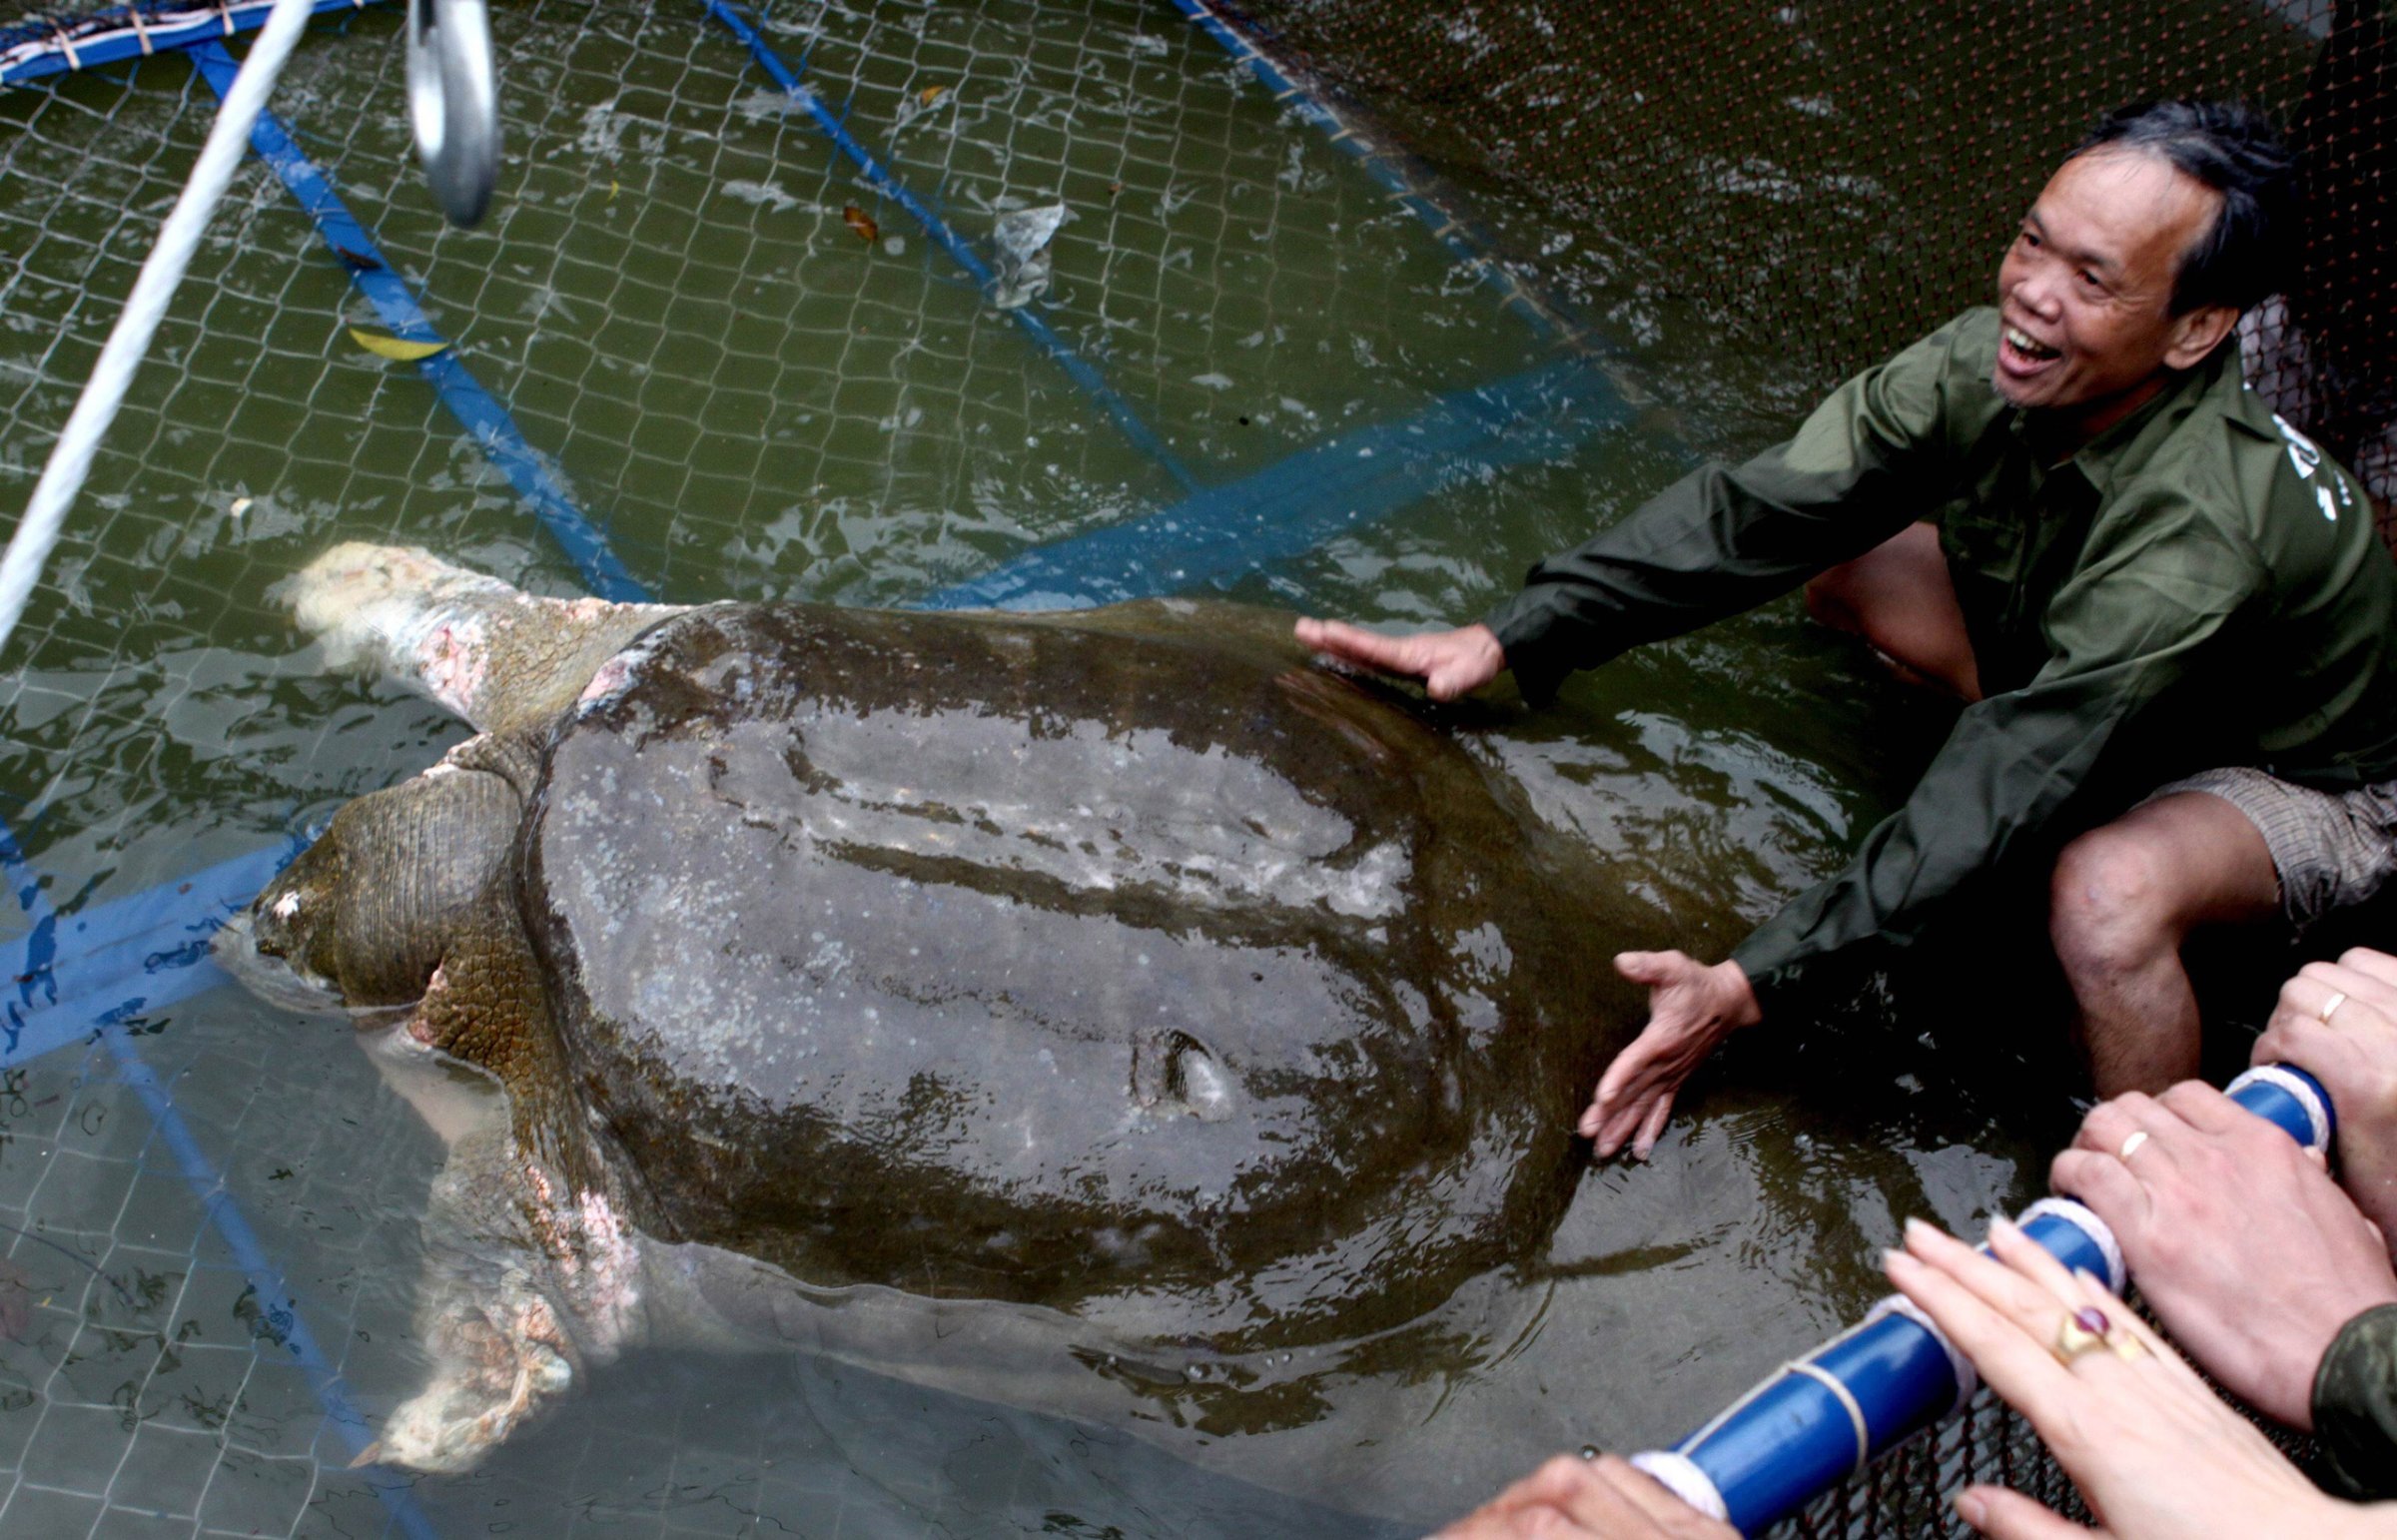 A giant soft-shell turtle (Rafetus swinhoei) which is considered a sacred symbol of Vietnamese independence is guided into a cage for a health check by handlers at Hoan Kiem lake in the heart of Hanoi. Thousands of onlookers cheered in central Hanoi on April 3, 2011 when rescuers captured for treatment the ailing and ancient giant turtle. Legend has it that the turtle is the guardian of a magical sword once used in the 15th century to drive out Chinese invaders. Concern has mounted in recent months over the health of the animal likely to be over 100 years old and one of the last of a critically endangered species -- it is one of only four Rafetus swinhoei turtles known to exist in the world. AFP PHOTO / Vietnam News Agency (Photo credit should read -/AFP/Getty Images)